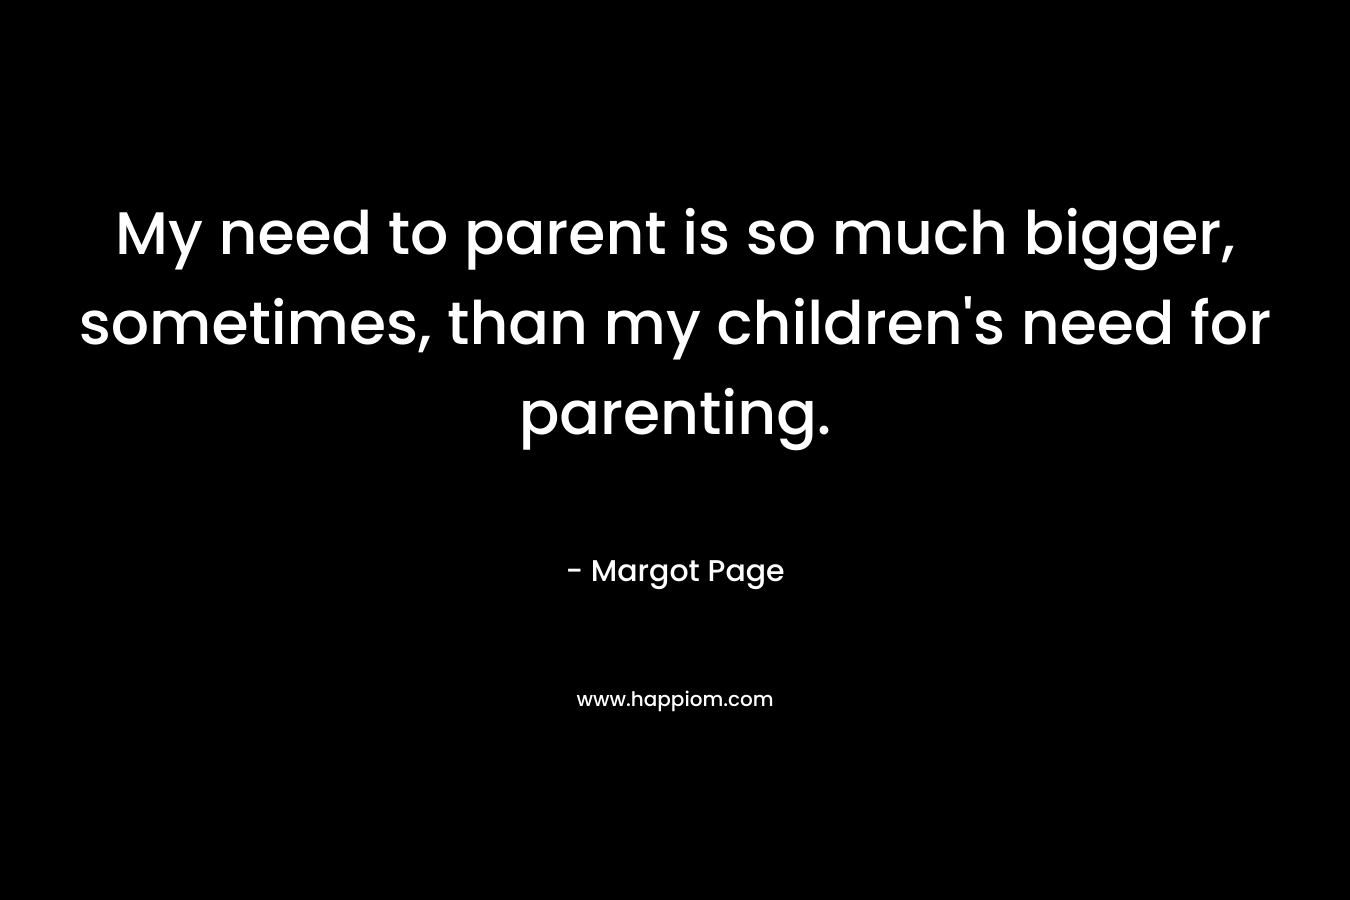 My need to parent is so much bigger, sometimes, than my children's need for parenting.